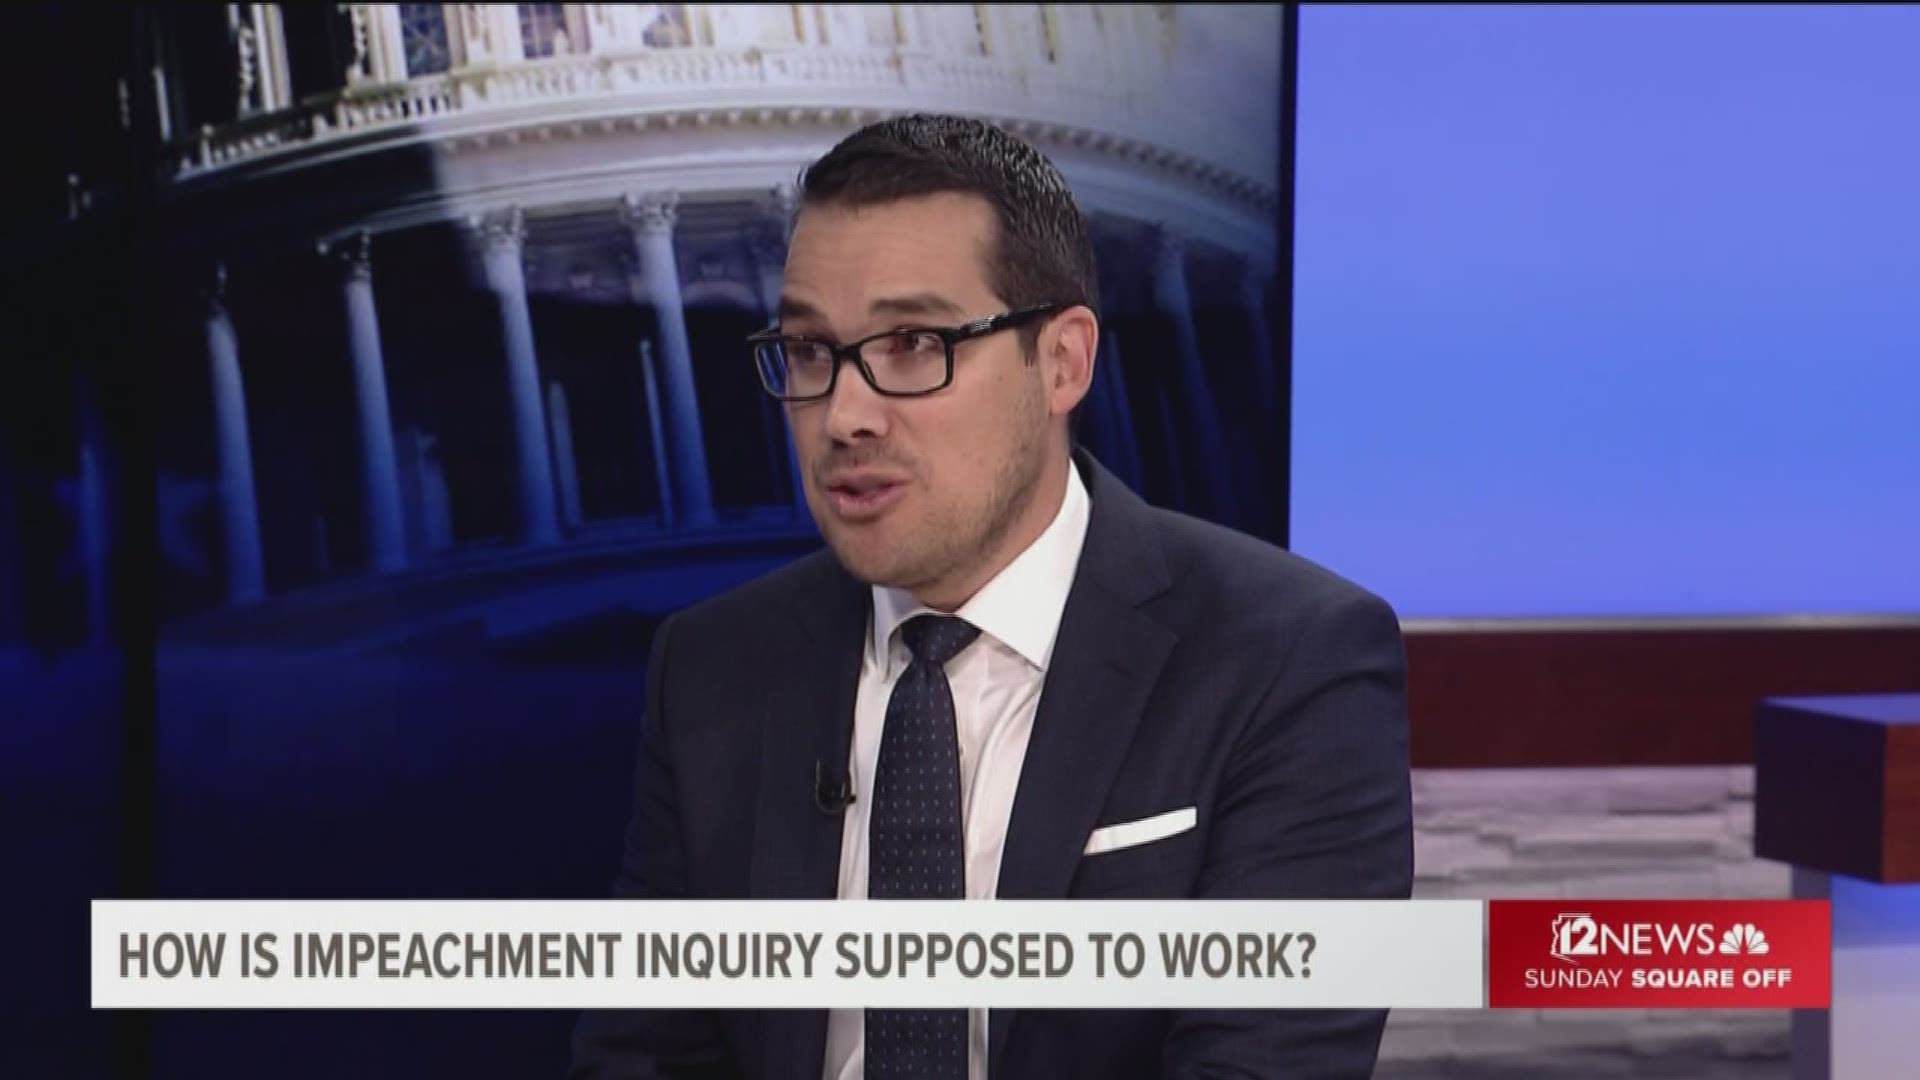 James Goodnow, a legal and political analyst, says there are few rules governing impeachment proceedings in the House.